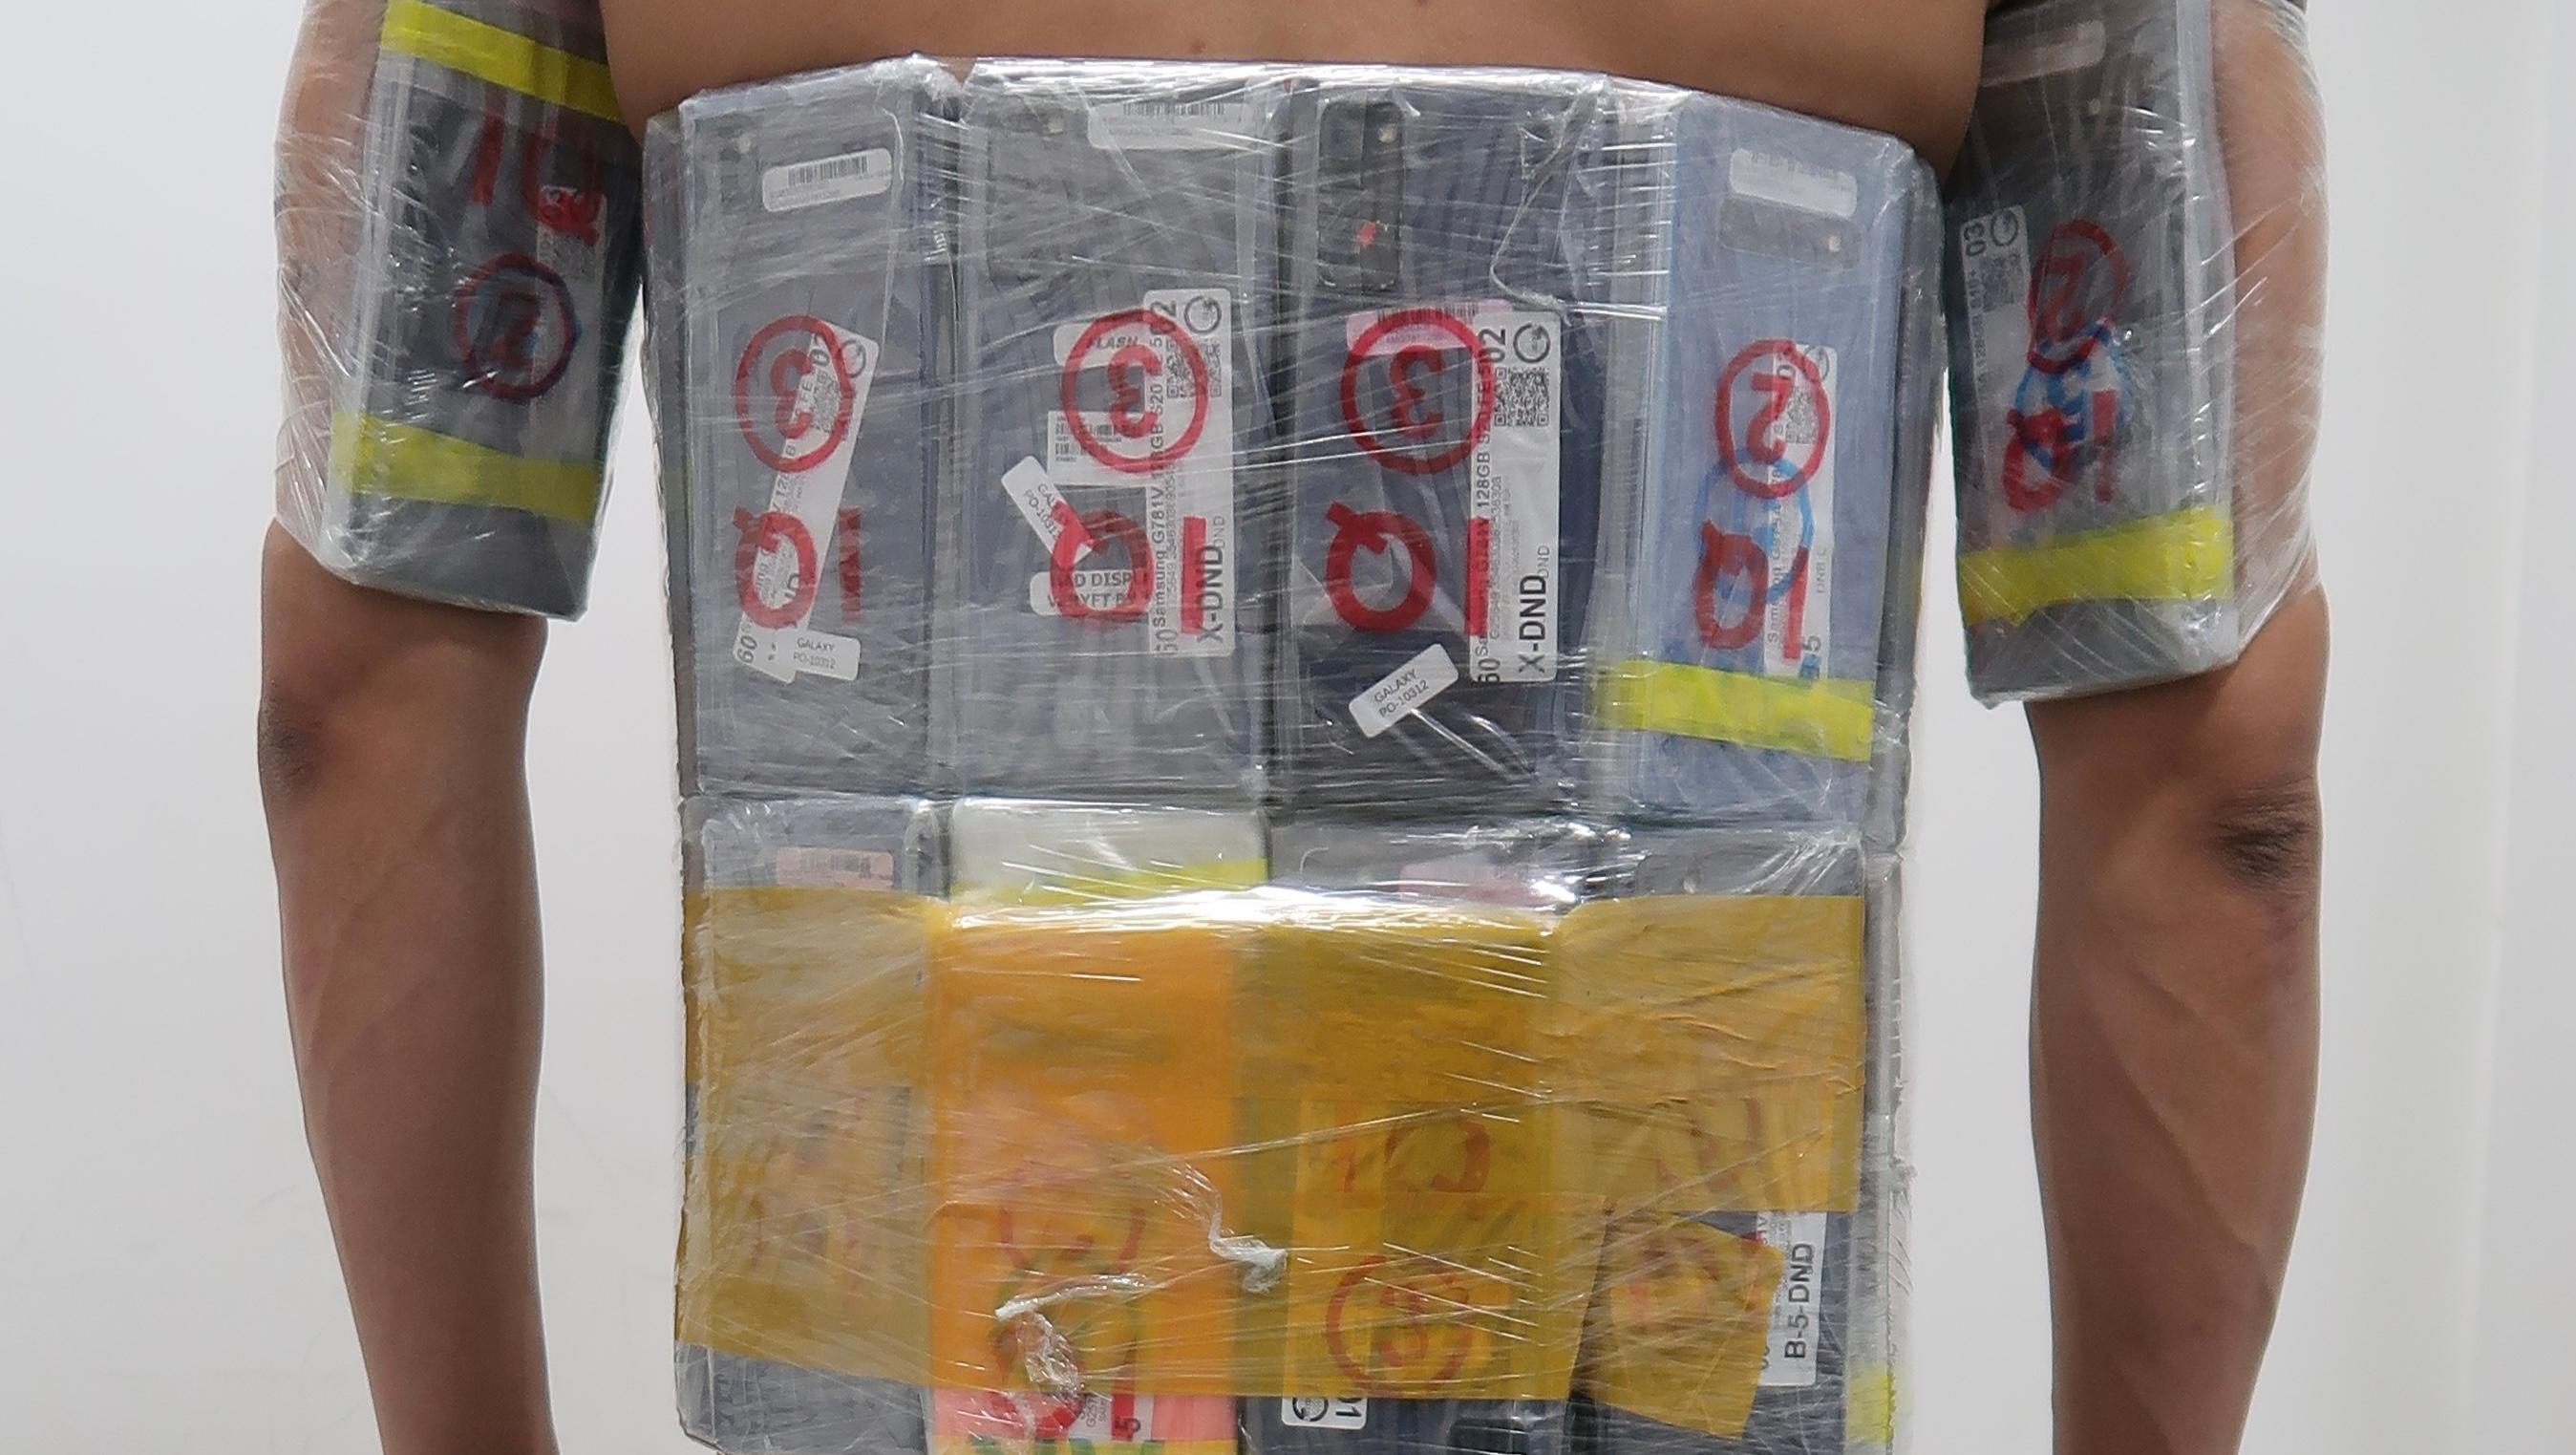 Hong Kong Customs yesterday (February 9) detected a suspected mobile phone smuggling case at the Shenzhen Bay Control Point and seized 40 mobile phones with an estimated market value of about $35,000. Photo shows the mobile phones strapped under a male passenger's armpits and around his waist, as found by Customs officers when conducting customs clearance.